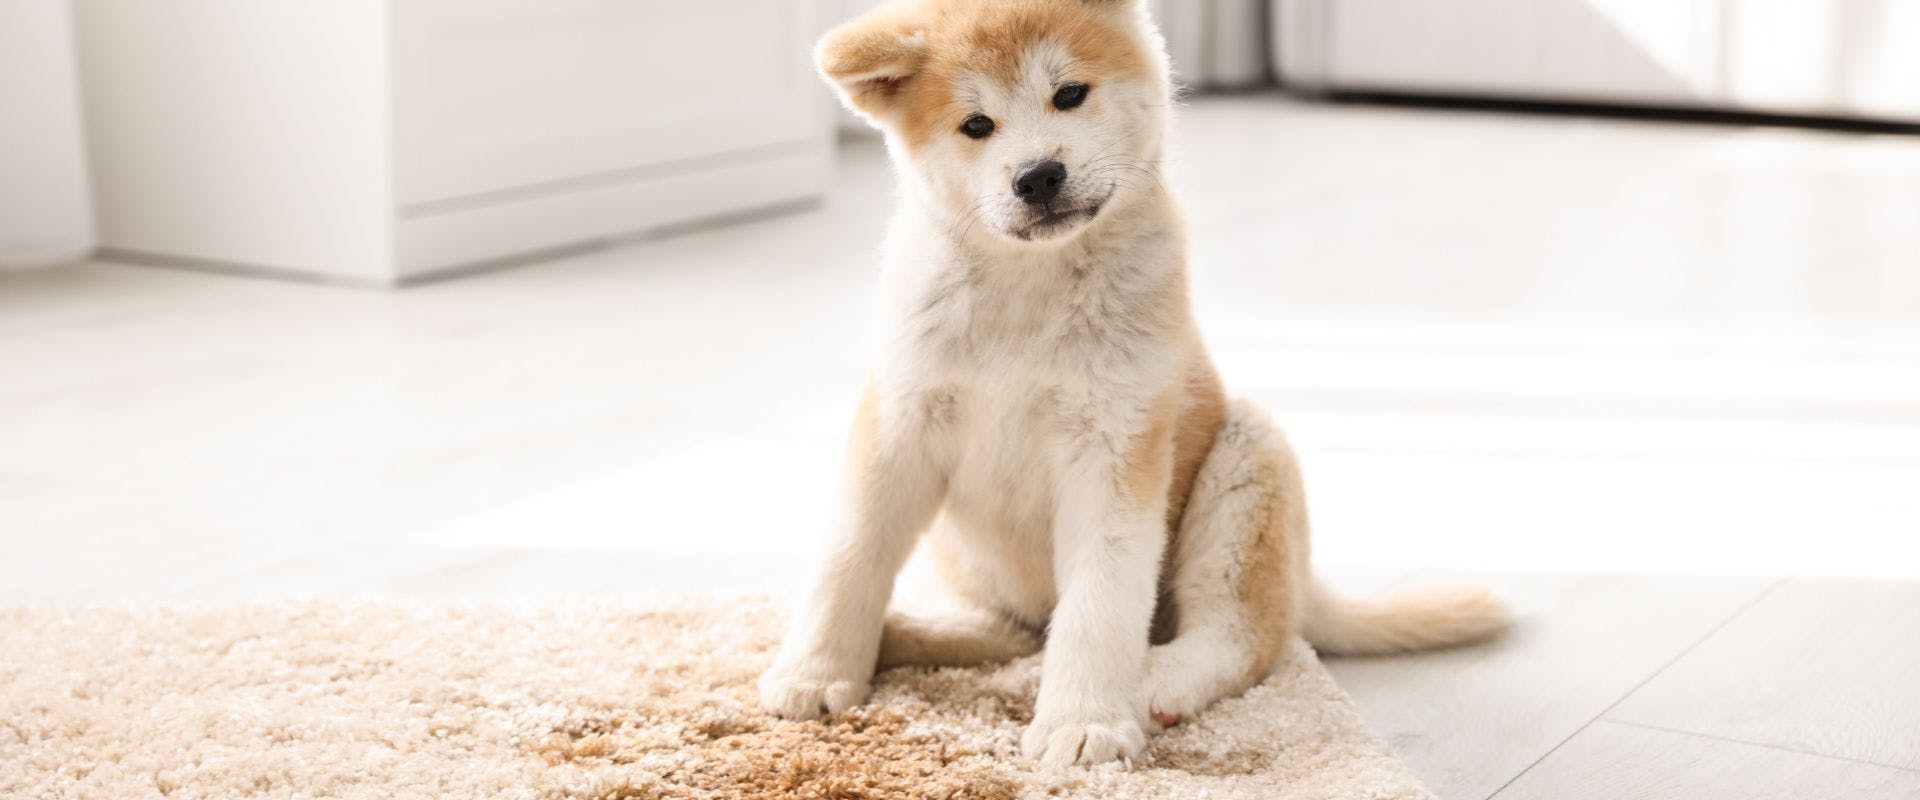 Akita Inu puppy near puddle on rug at home